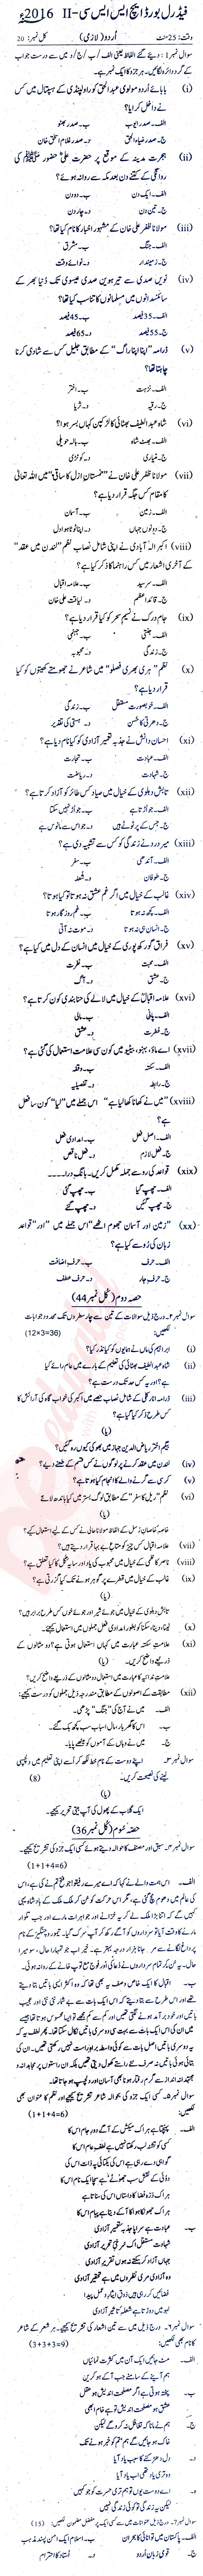 Urdu 12th class Past Paper Group 1 Federal BISE  2016